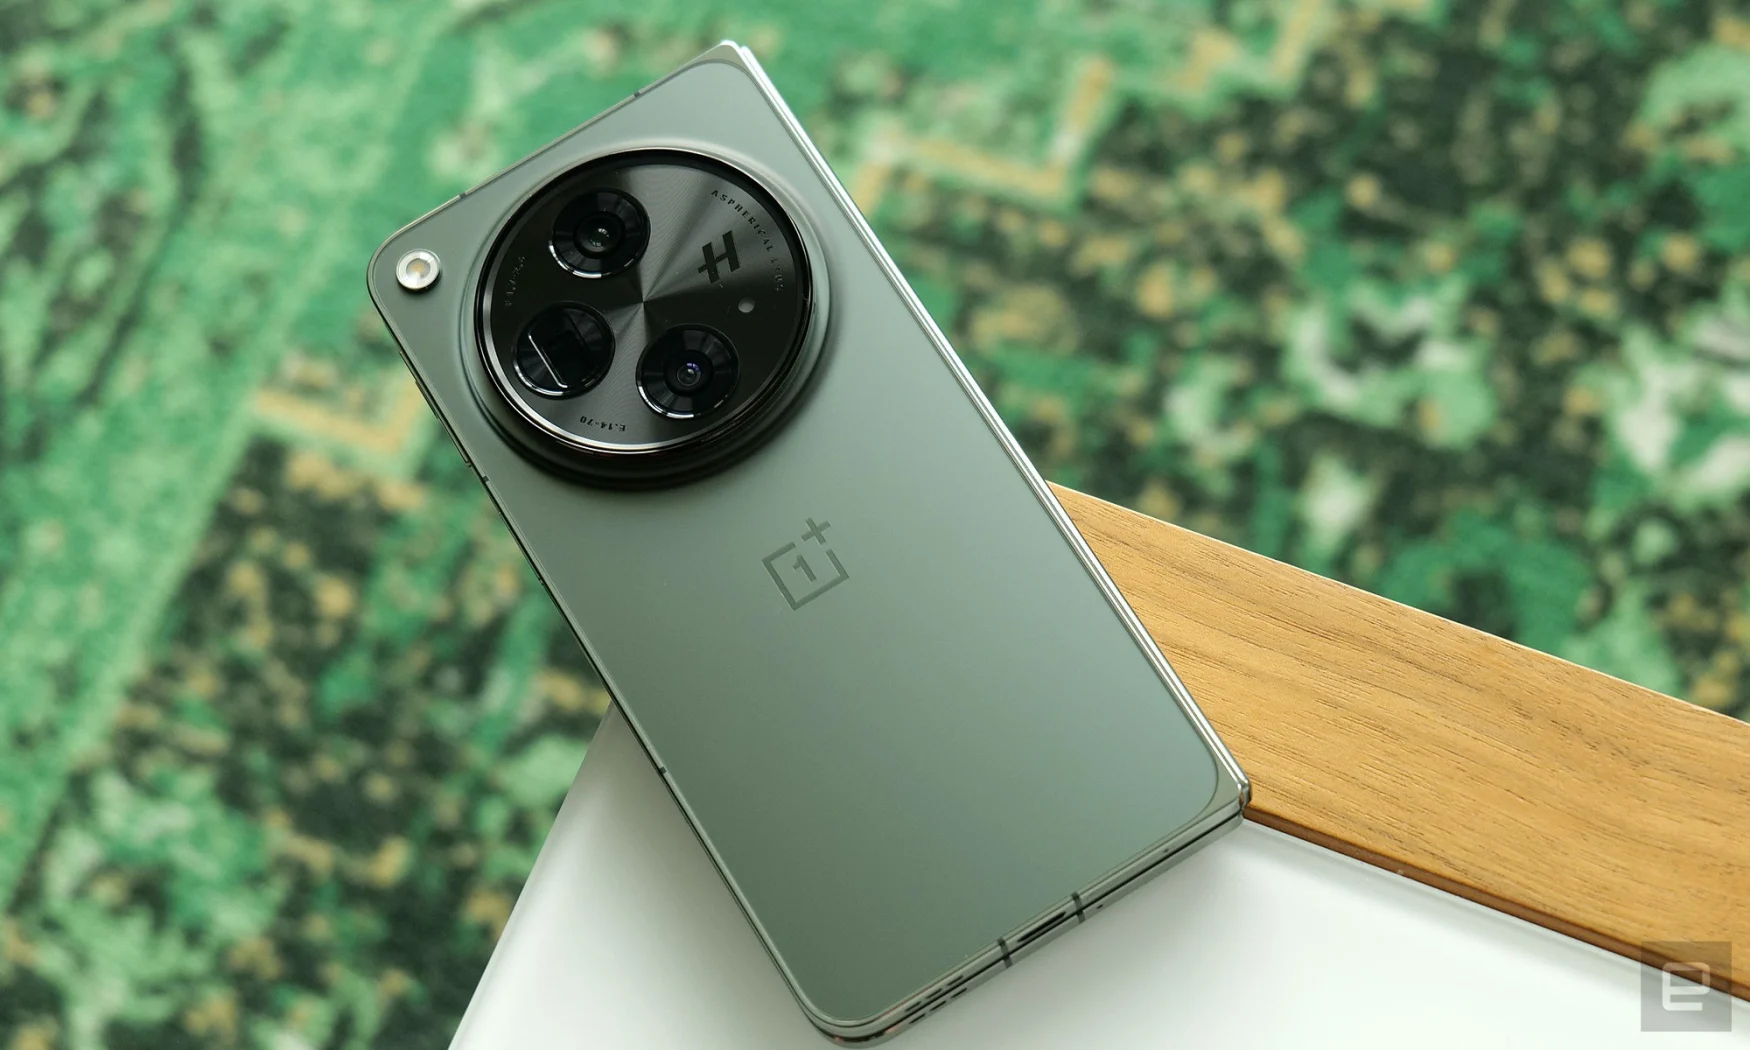 The OnePlus Open features three rear cameras including a 48-MP main camera with a large 1/1.43” sensor, a 64-MP telephoto camera and a 48-MP ultra-wide that can also shoot macro photos. 